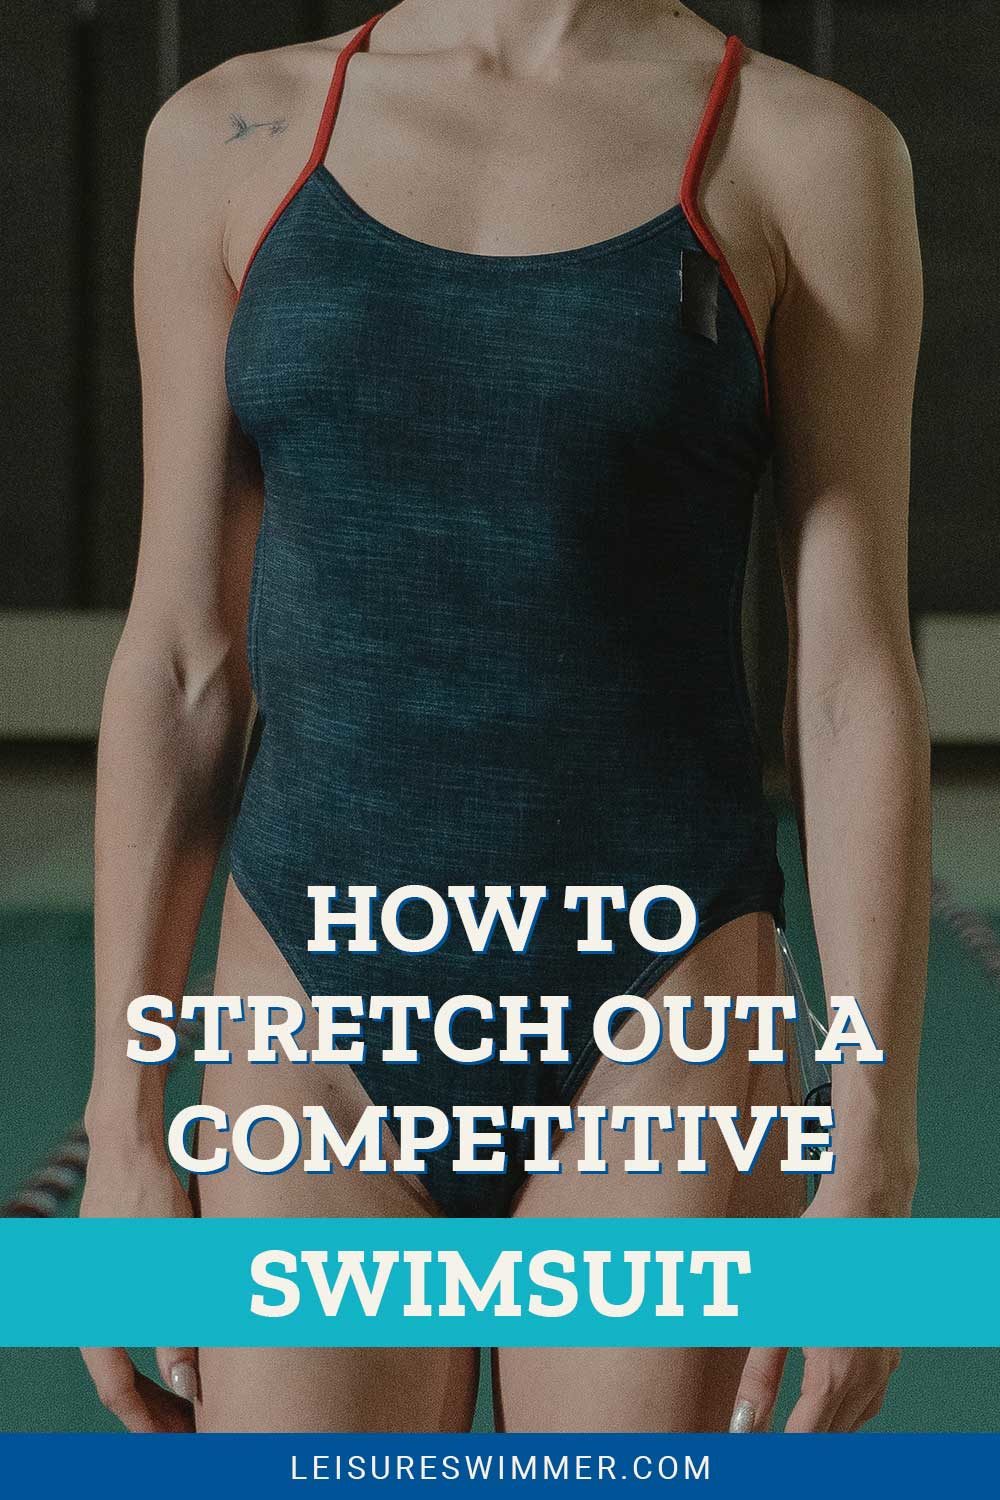 A black swimsuit on a woman's body - Stretch Out A Competitive Swimsuit.